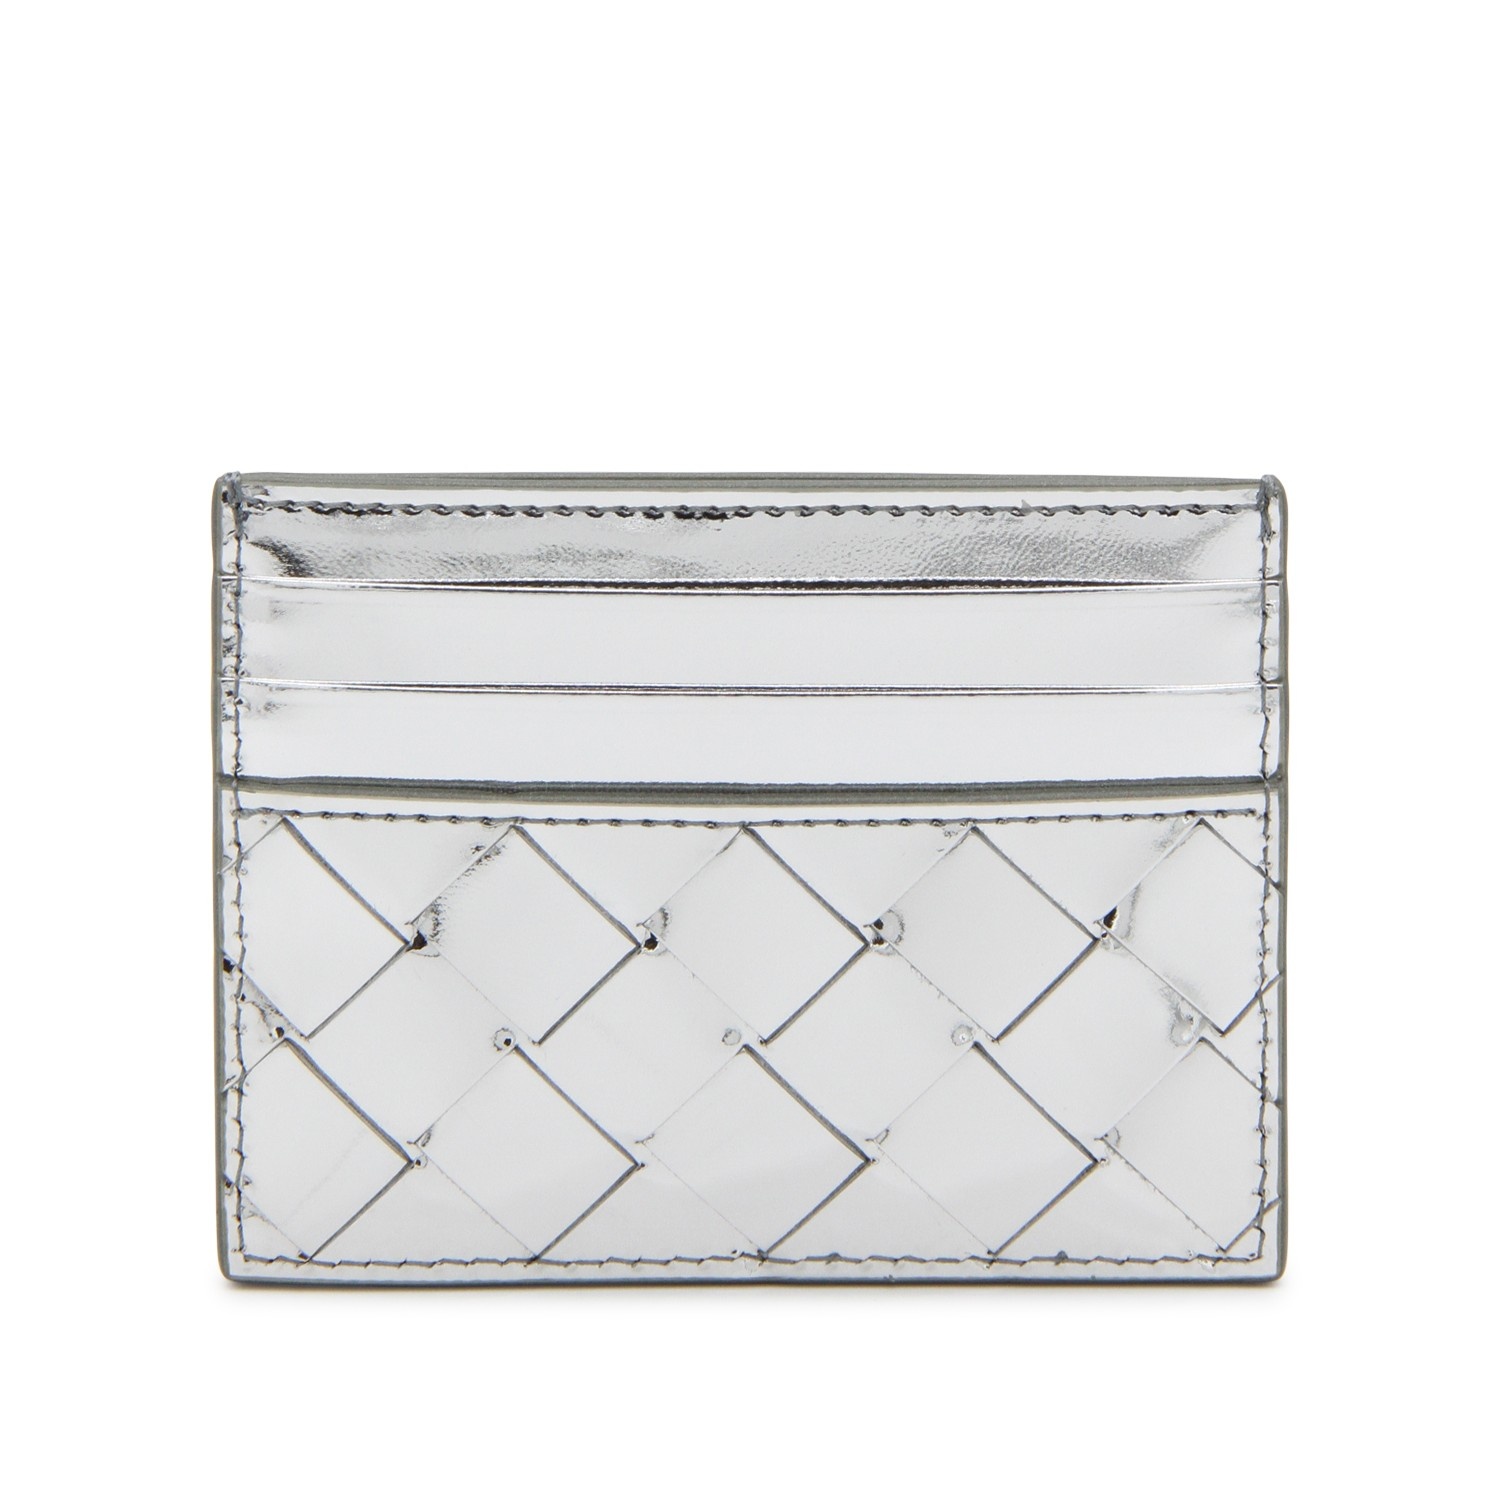 SILVER-TONE LEATHER CARD HOLDER - 1